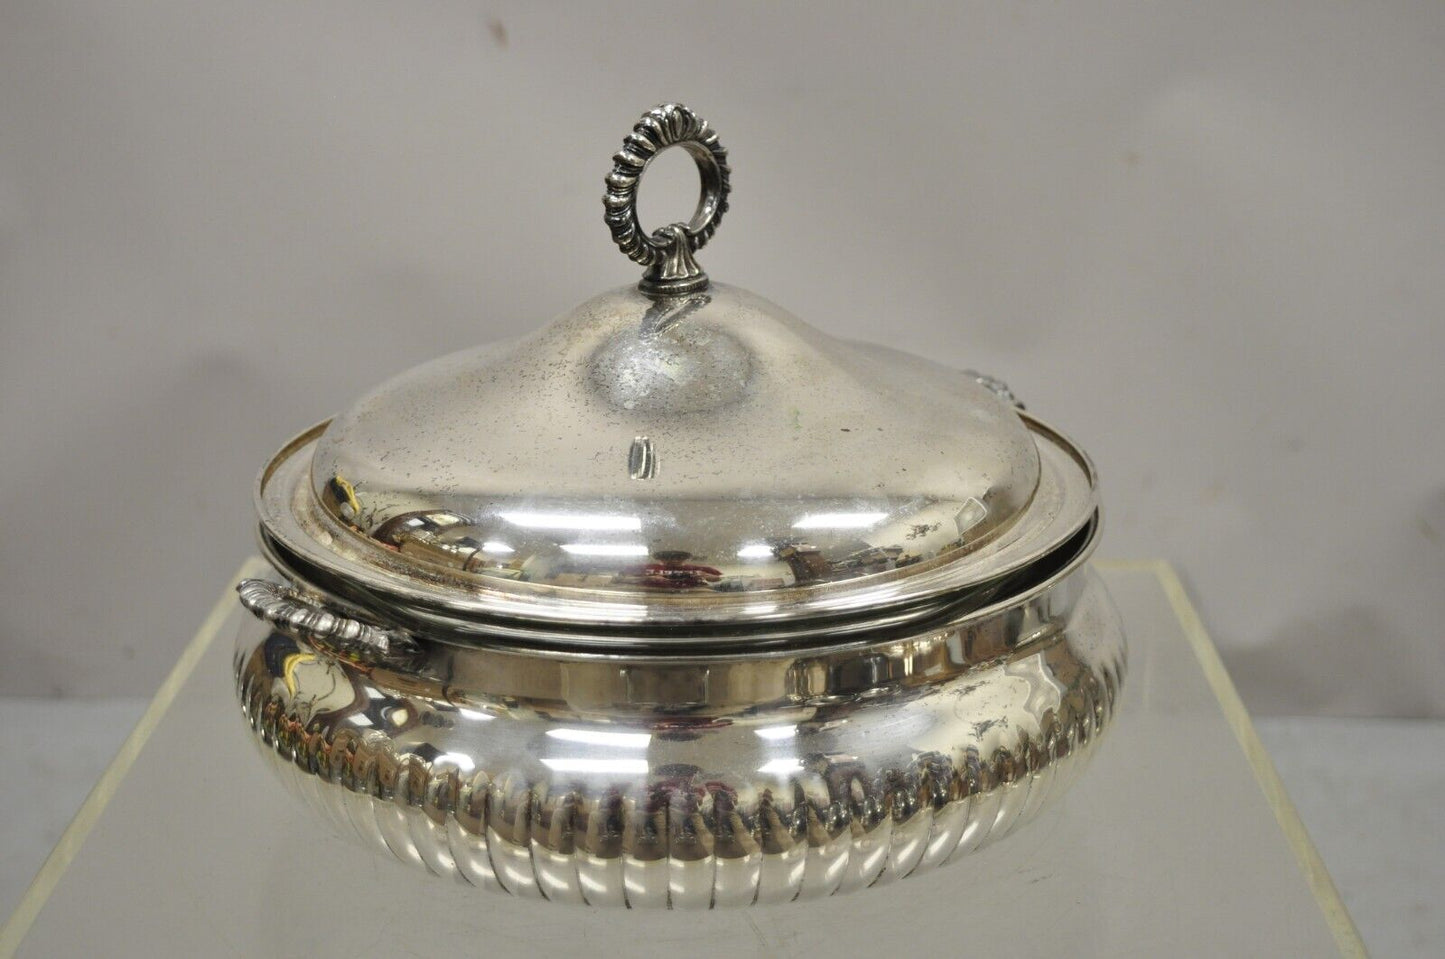 W&SB 195 Silver Plate Covered Platter Serving Tray Dish Bowl